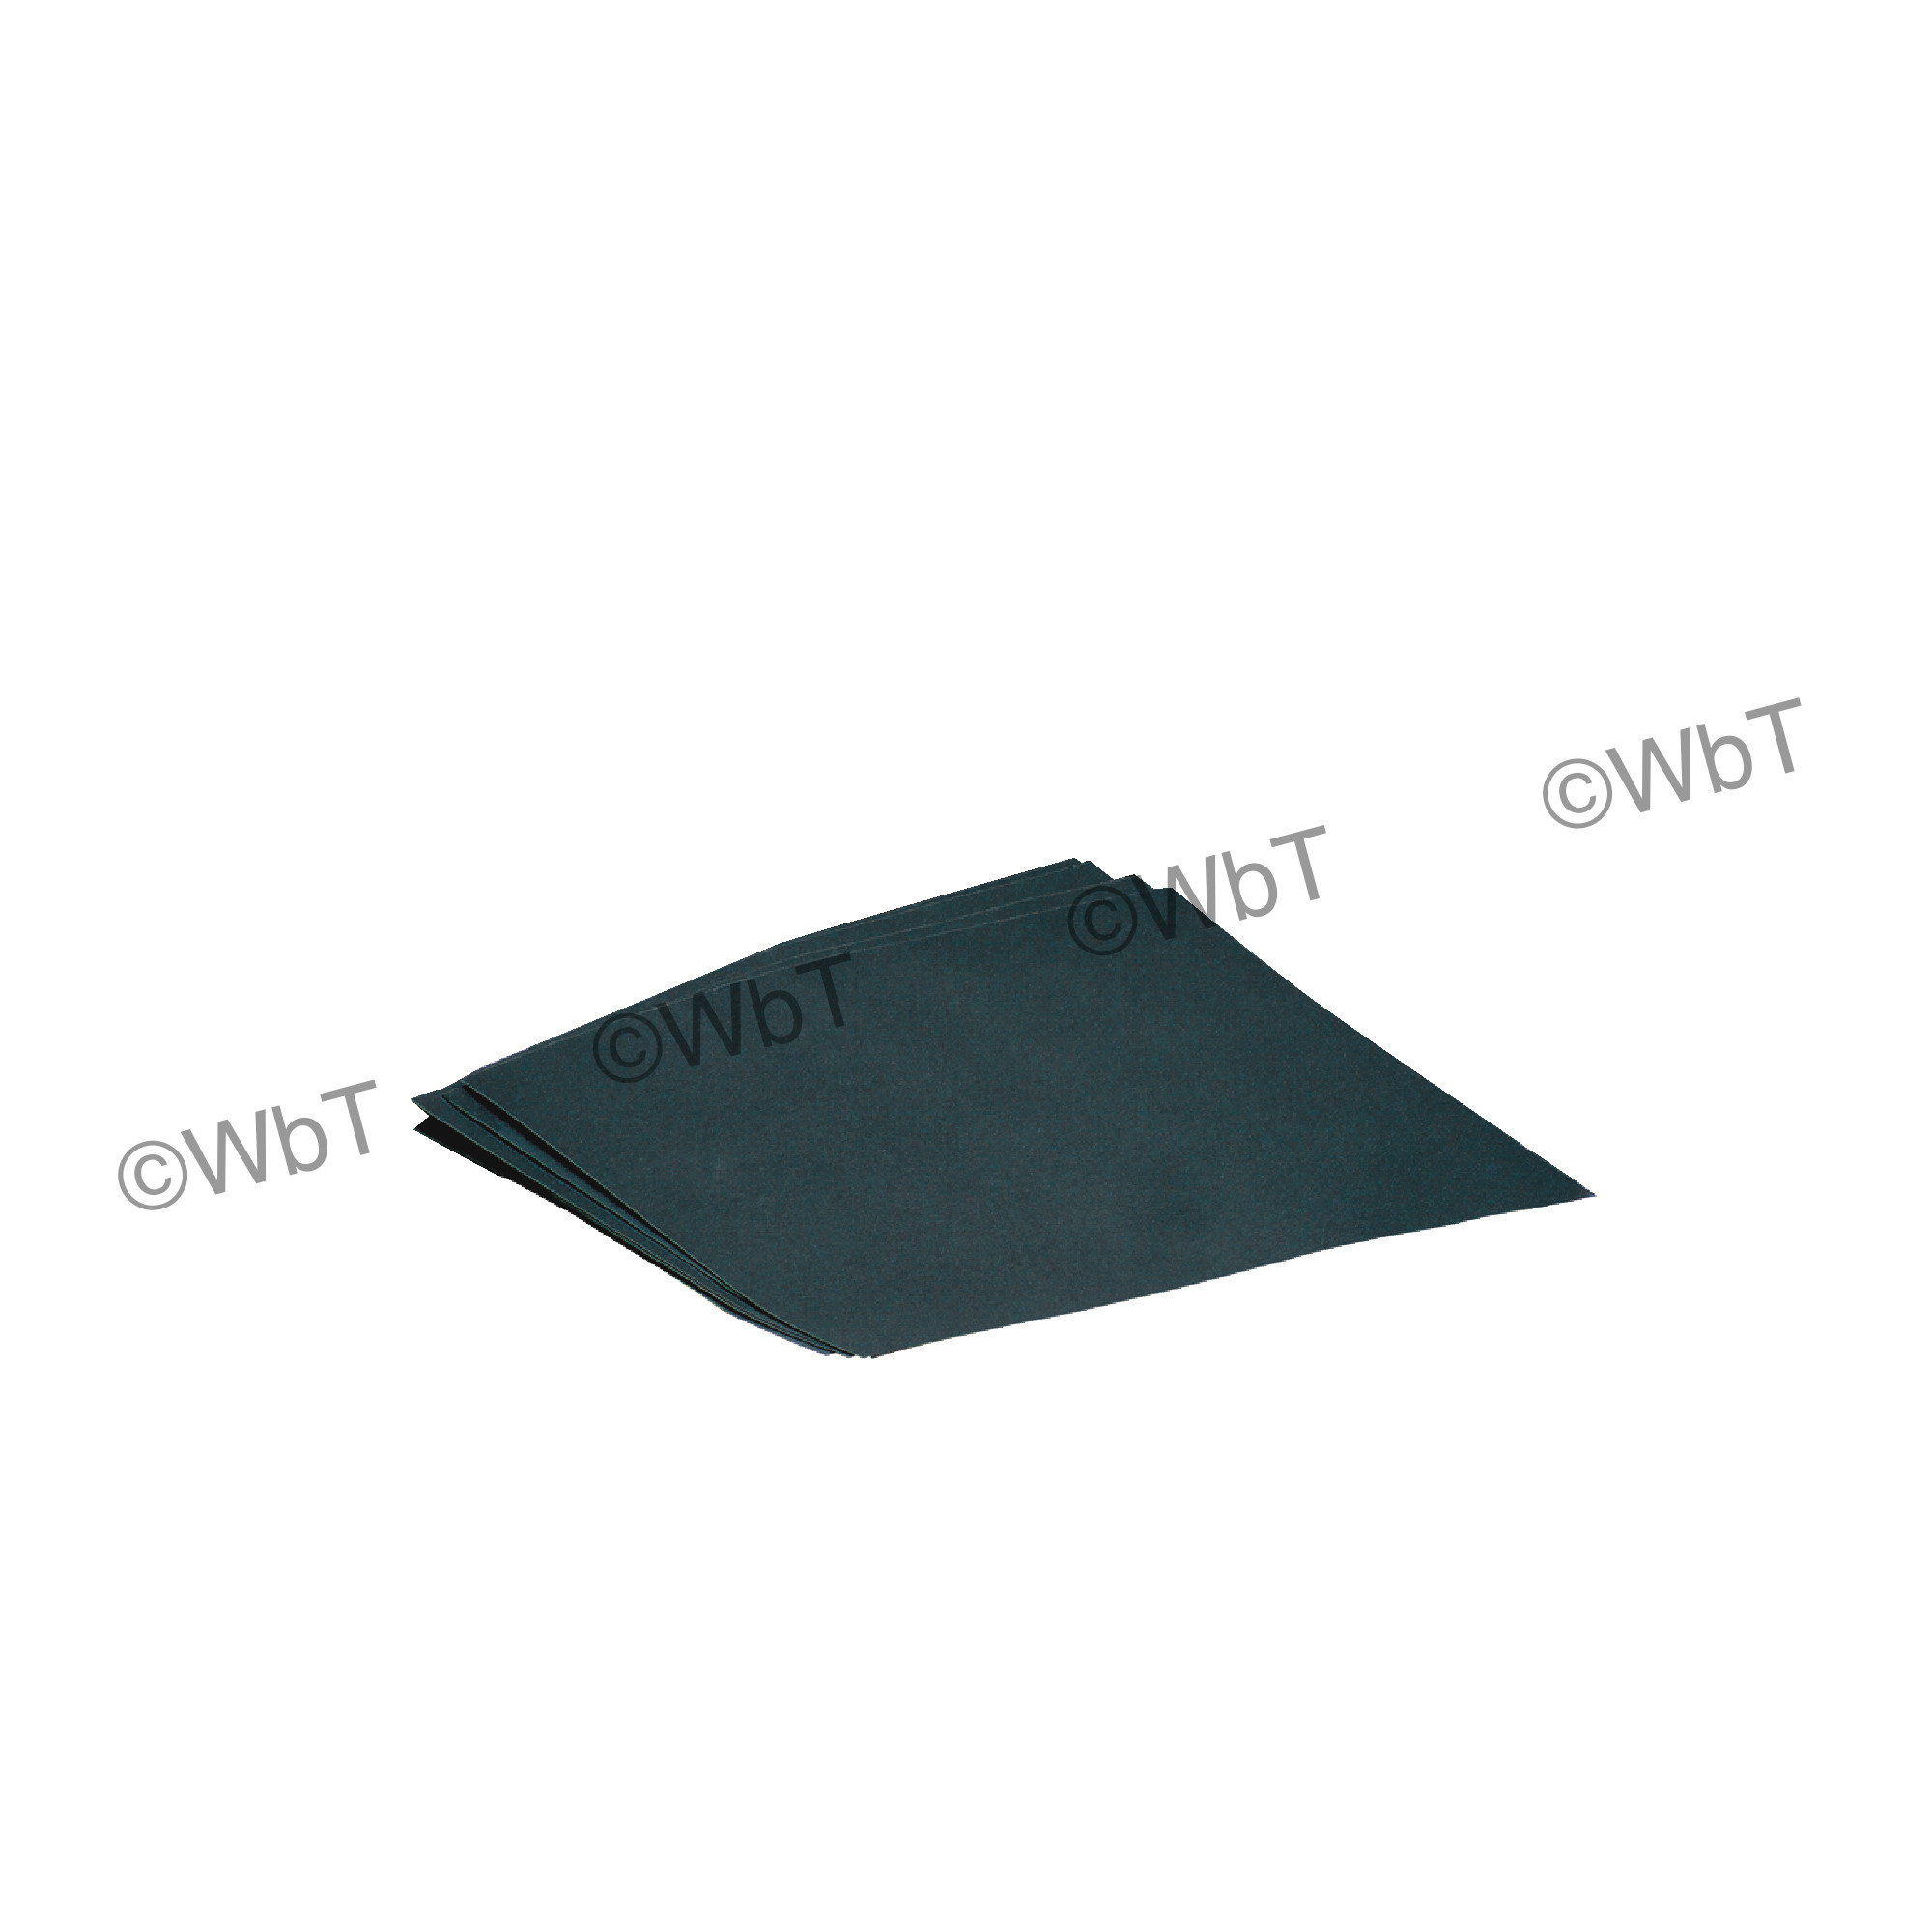 9" x 11" Abrasive Wet Or Dry Silicon Carbide Paper Sheets